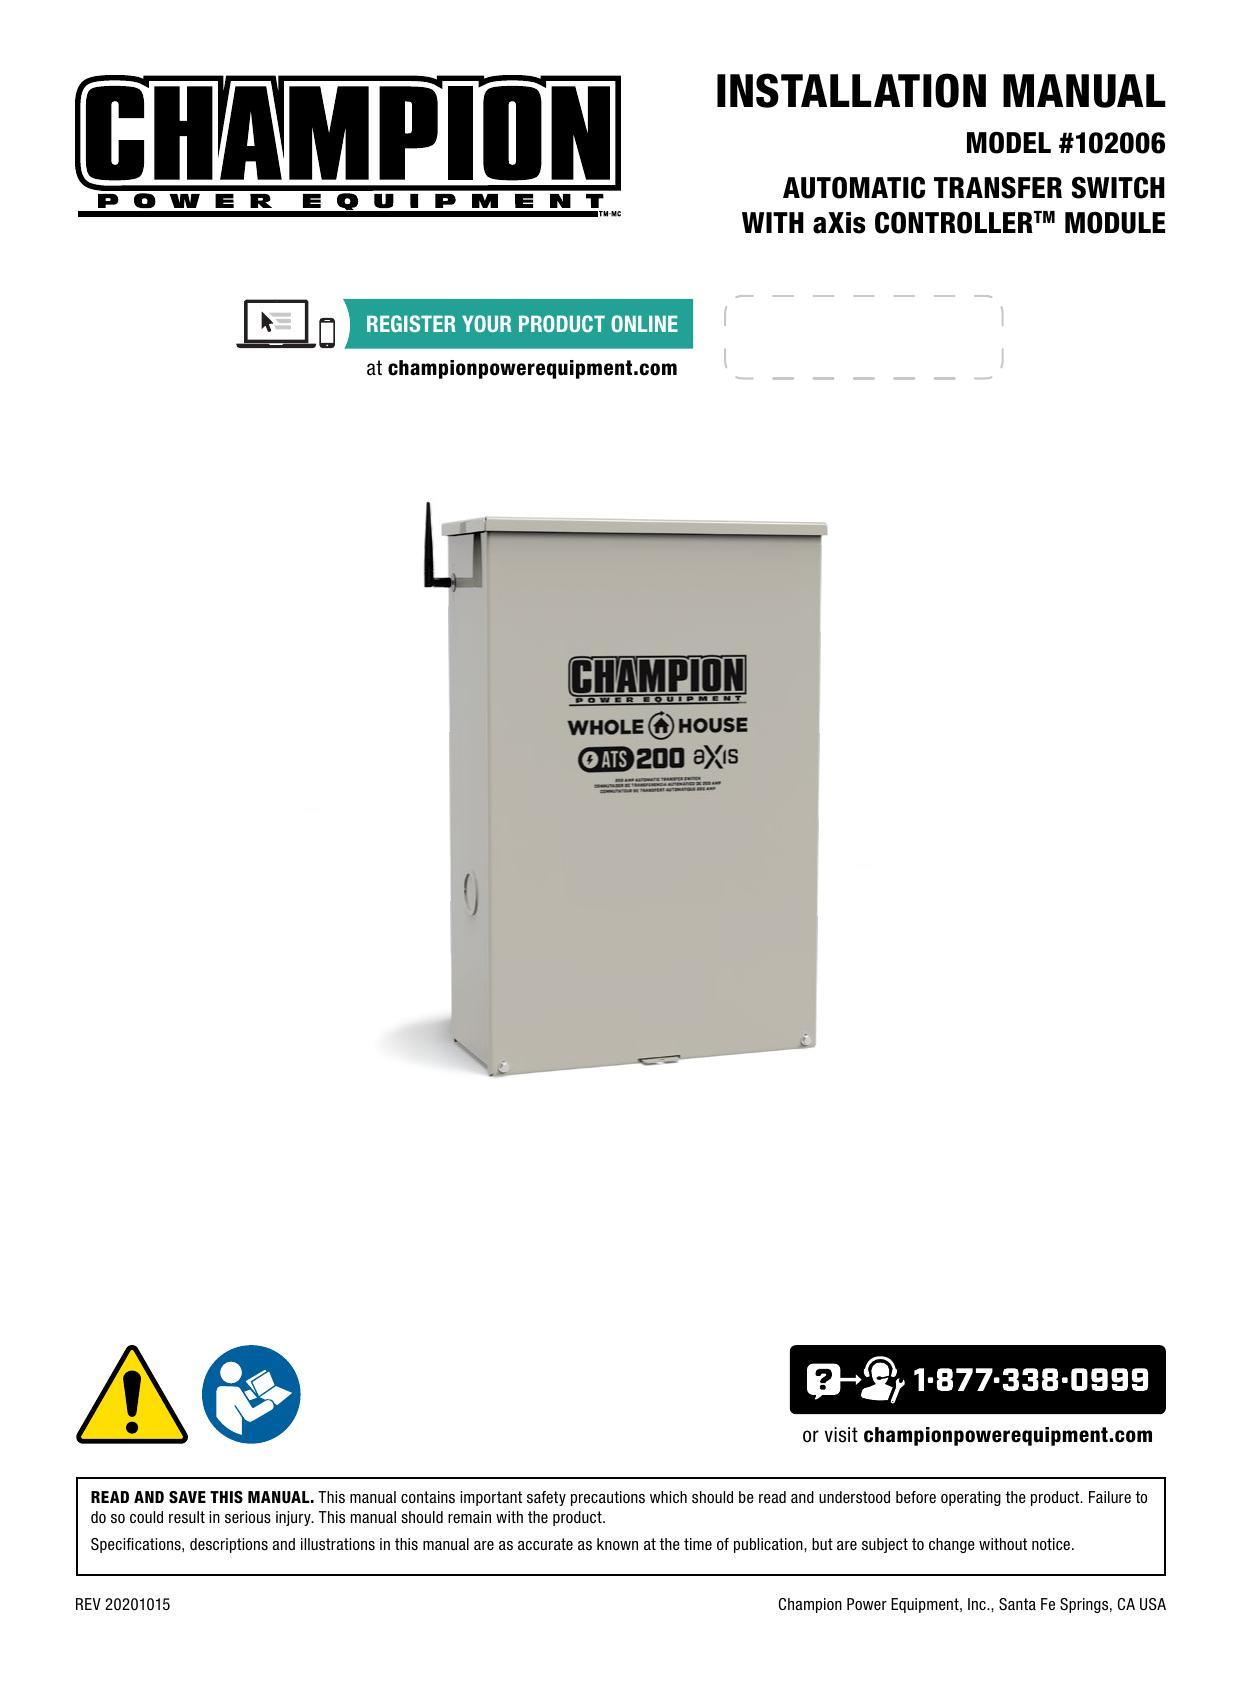 installation-manual-model-102006-automatic-transfer-switch-with-axis-controllertm-module.pdf